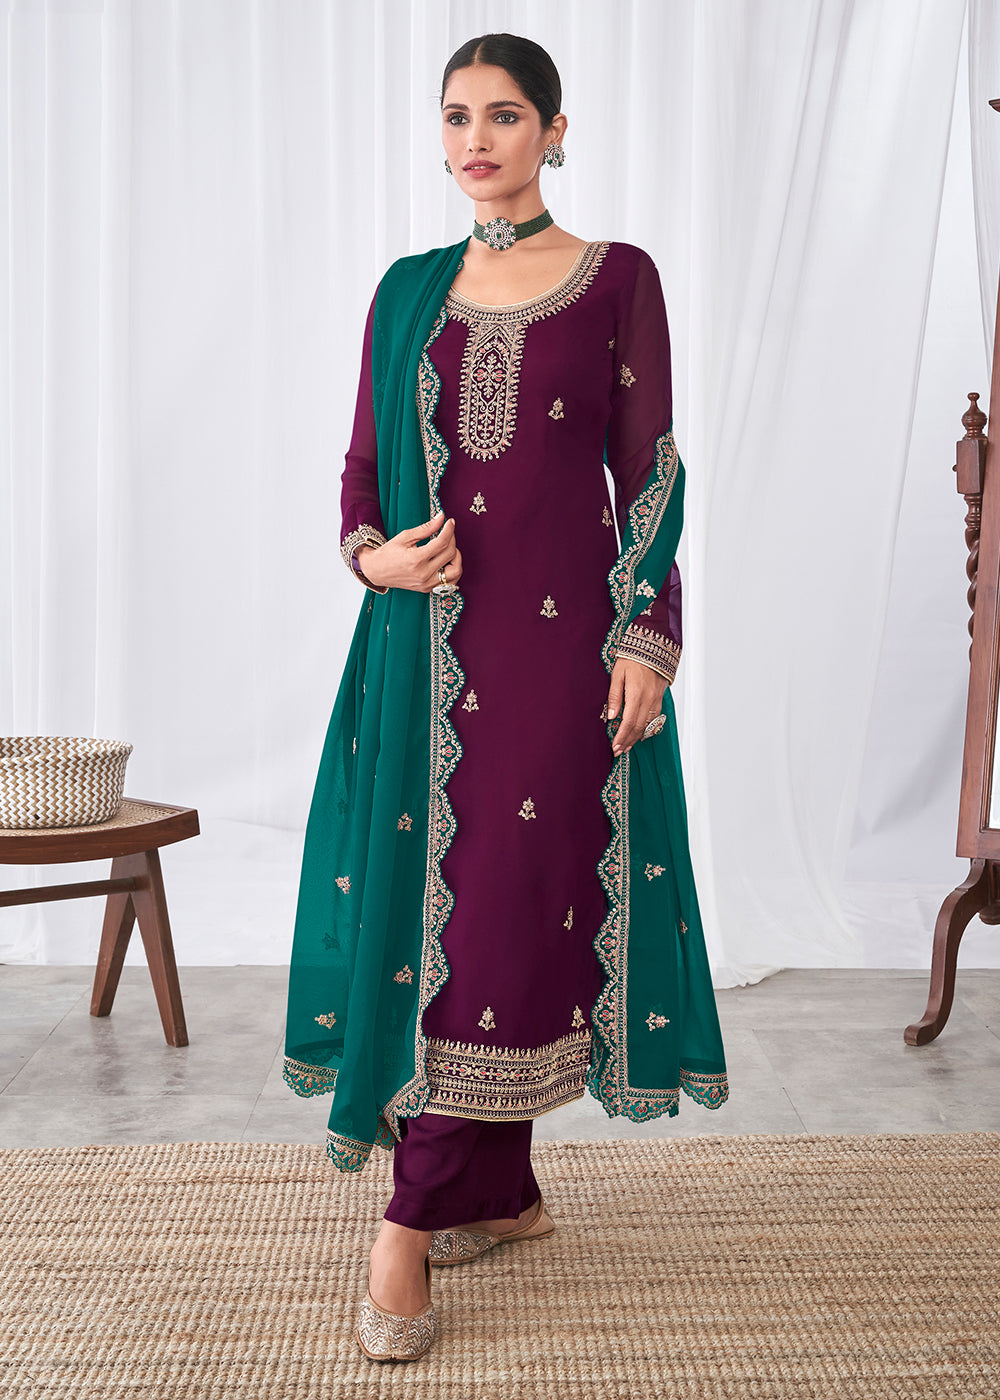 Buy Now Graceful Looking Purple Indian Party Wear Salwar Suit Online in USA, UK, Canada, Germany & Worldwide at Empress Clothing. 